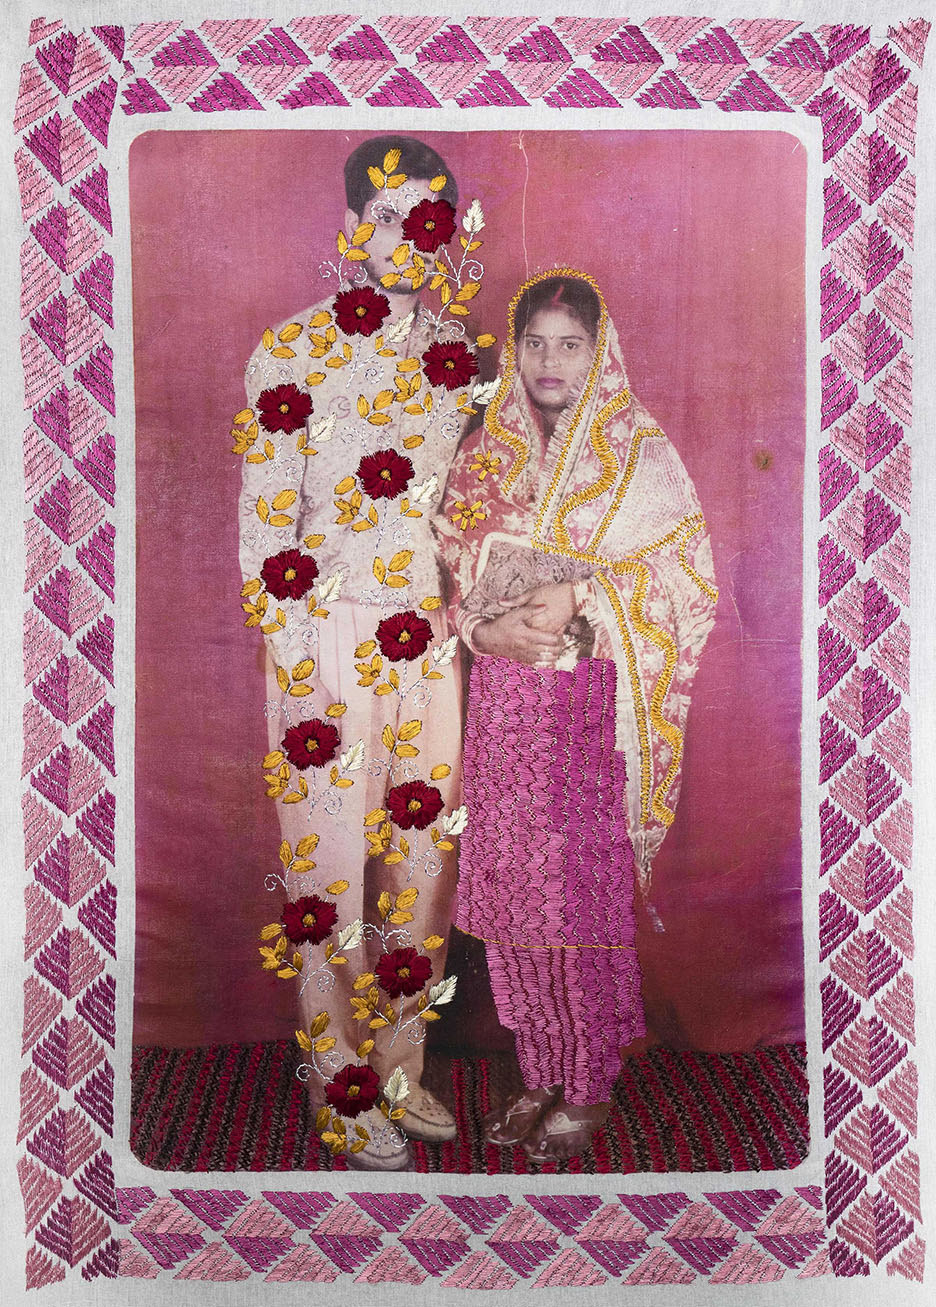 A woman stands next to a man who is covered by embroidered flowers